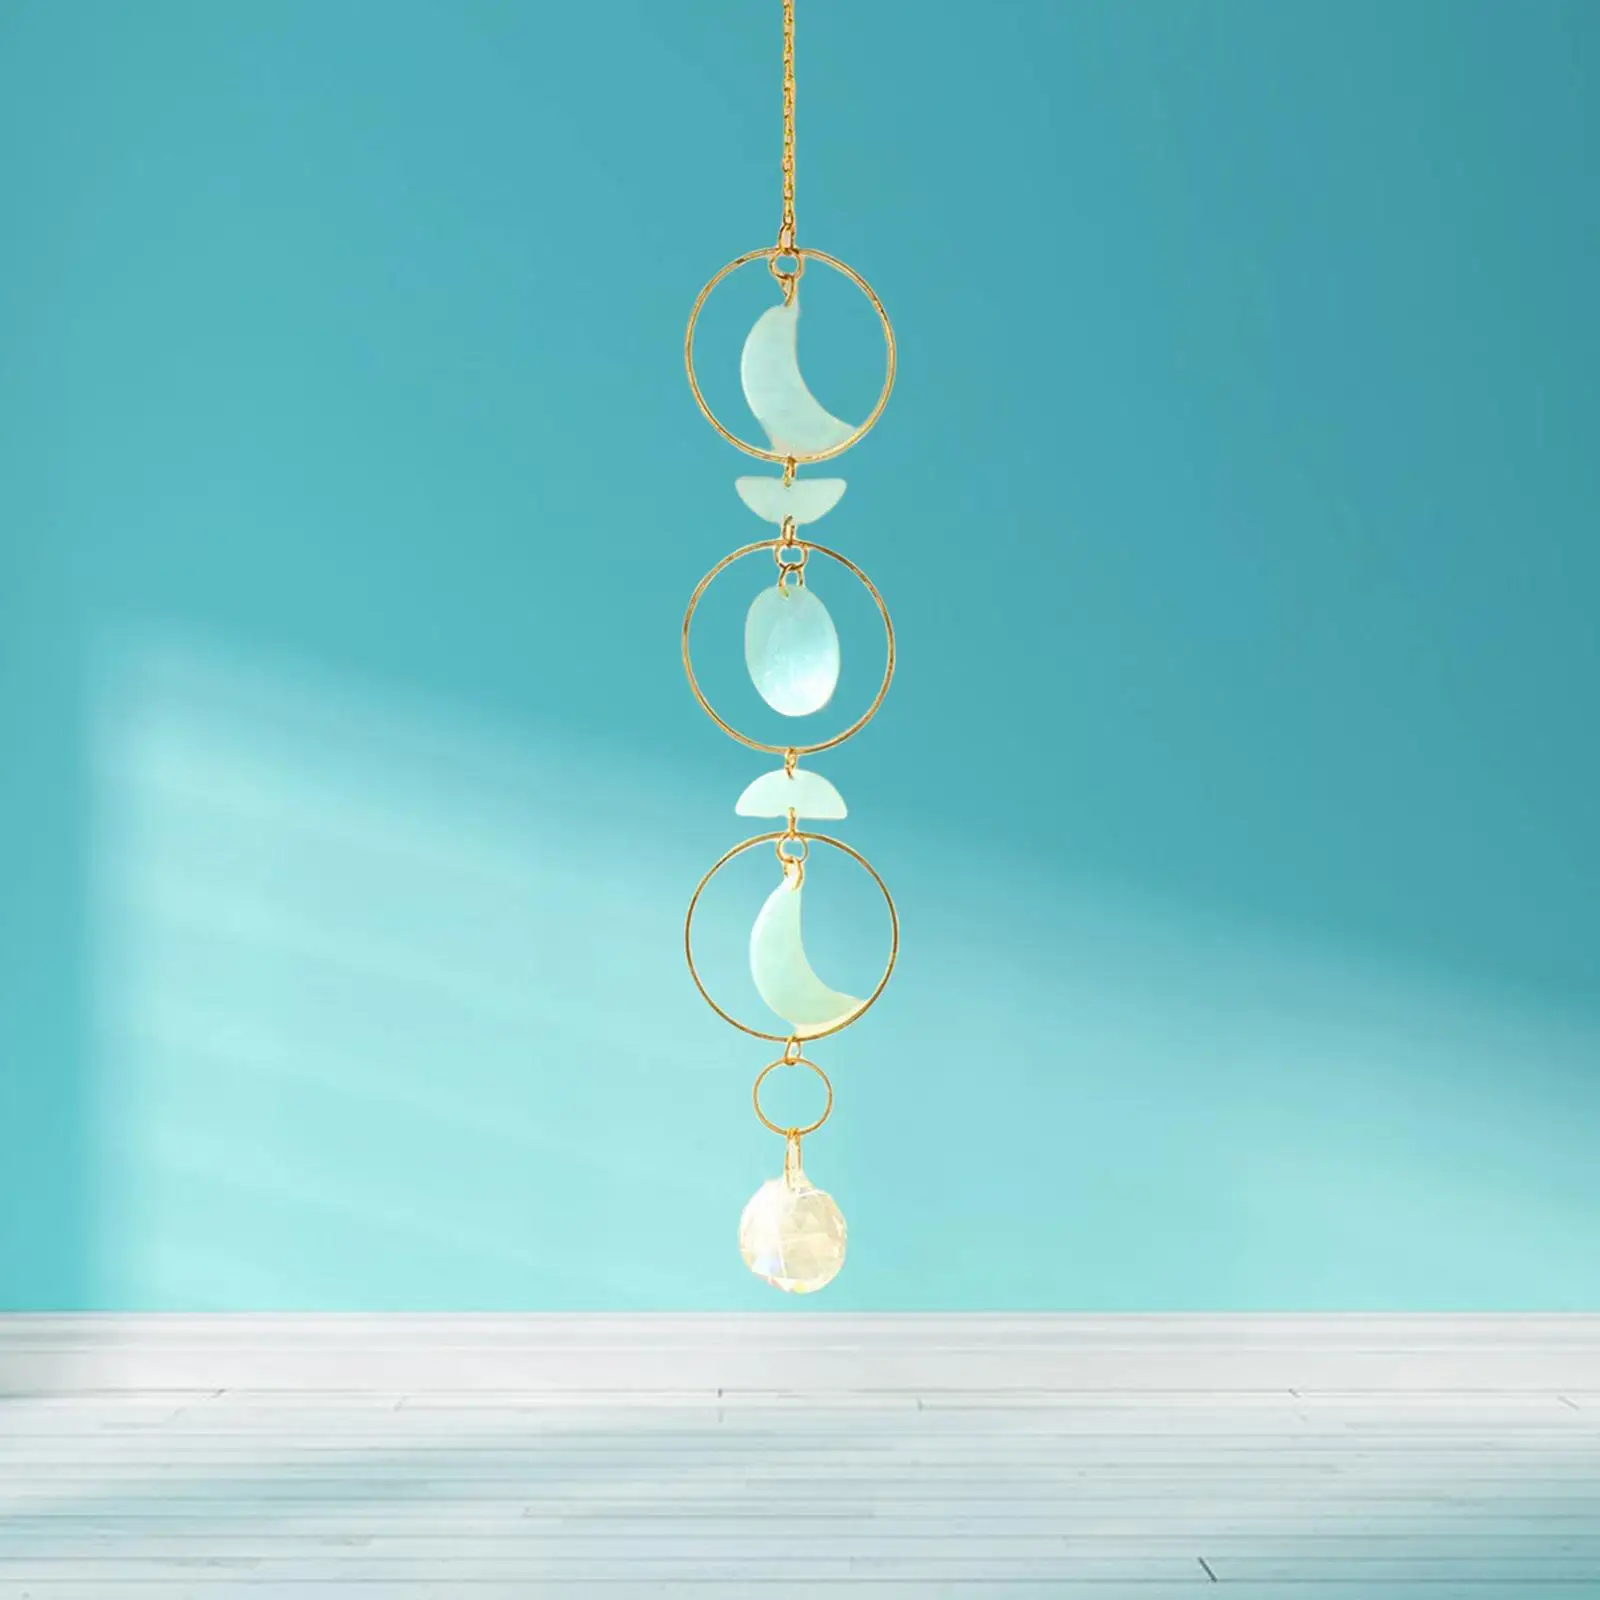 Hanging Pendant Rainbow Make Prisms Decor with Chain for Room Wedding Home